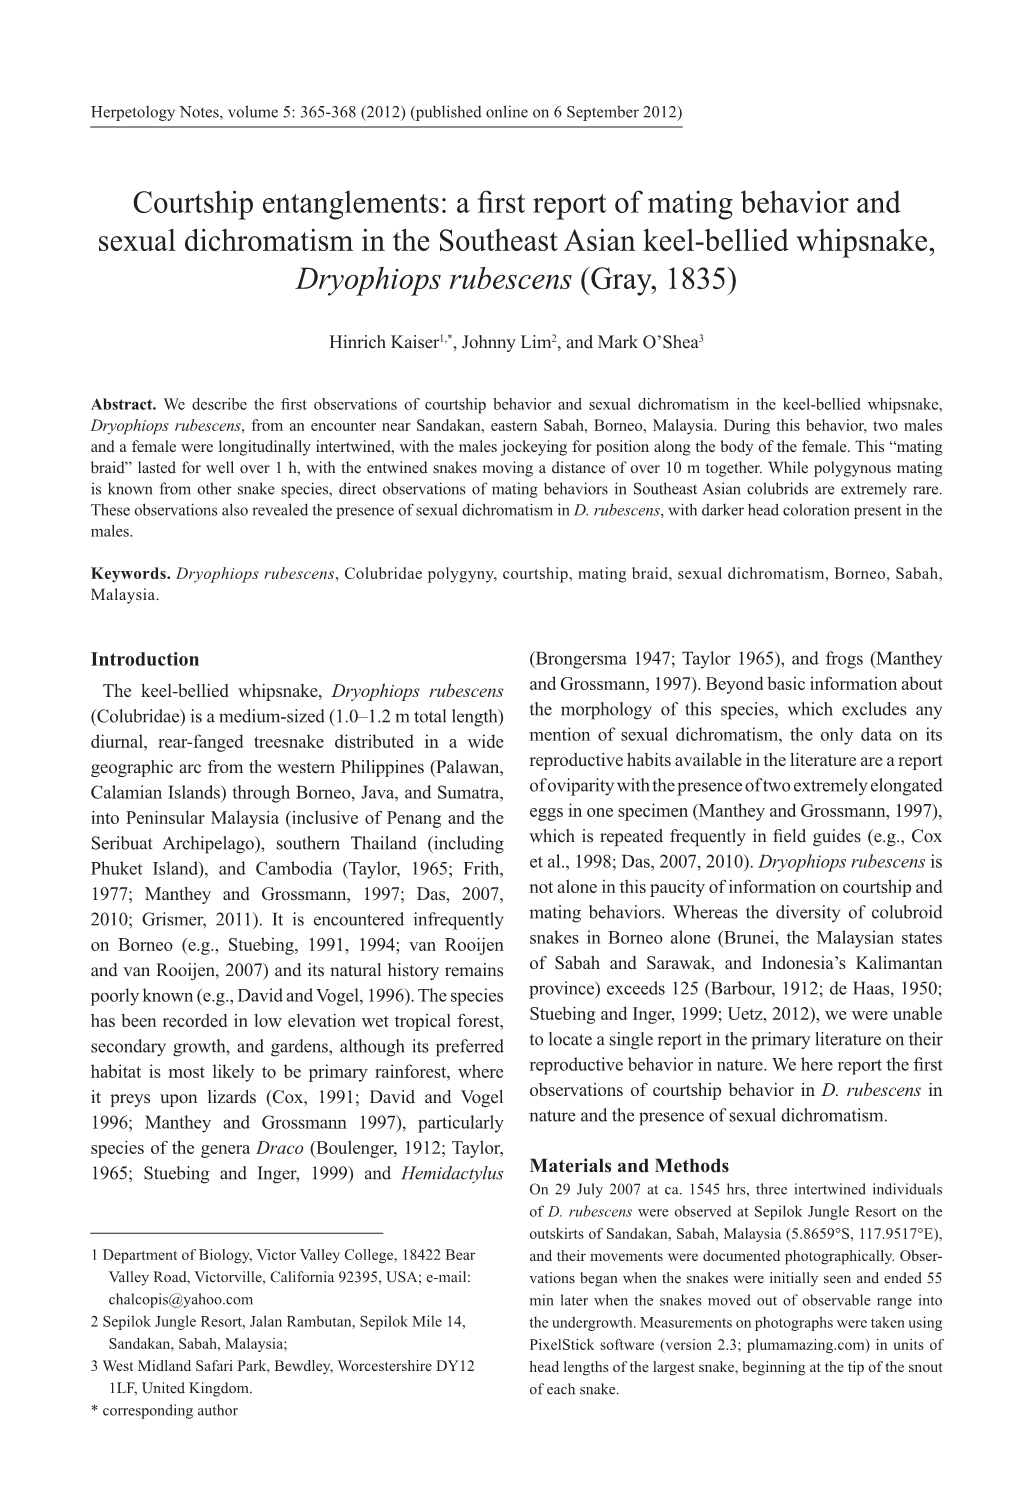 Courtship Entanglements: a First Report of Mating Behavior and Sexual Dichromatism in the Southeast Asian Keel-Bellied Whipsnake, Dryophiops Rubescens (Gray, 1835)